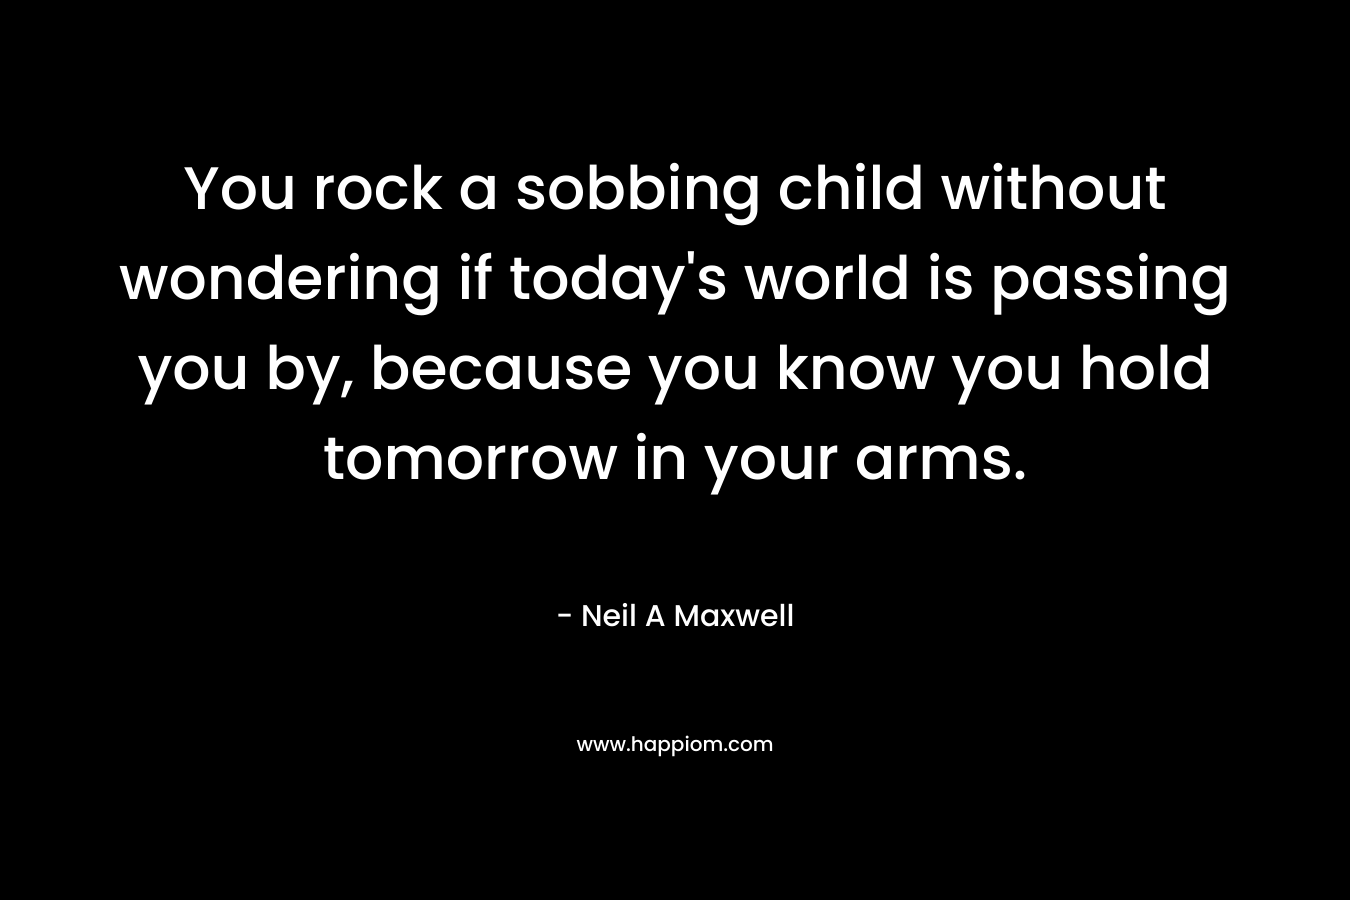 You rock a sobbing child without wondering if today's world is passing you by, because you know you hold tomorrow in your arms.